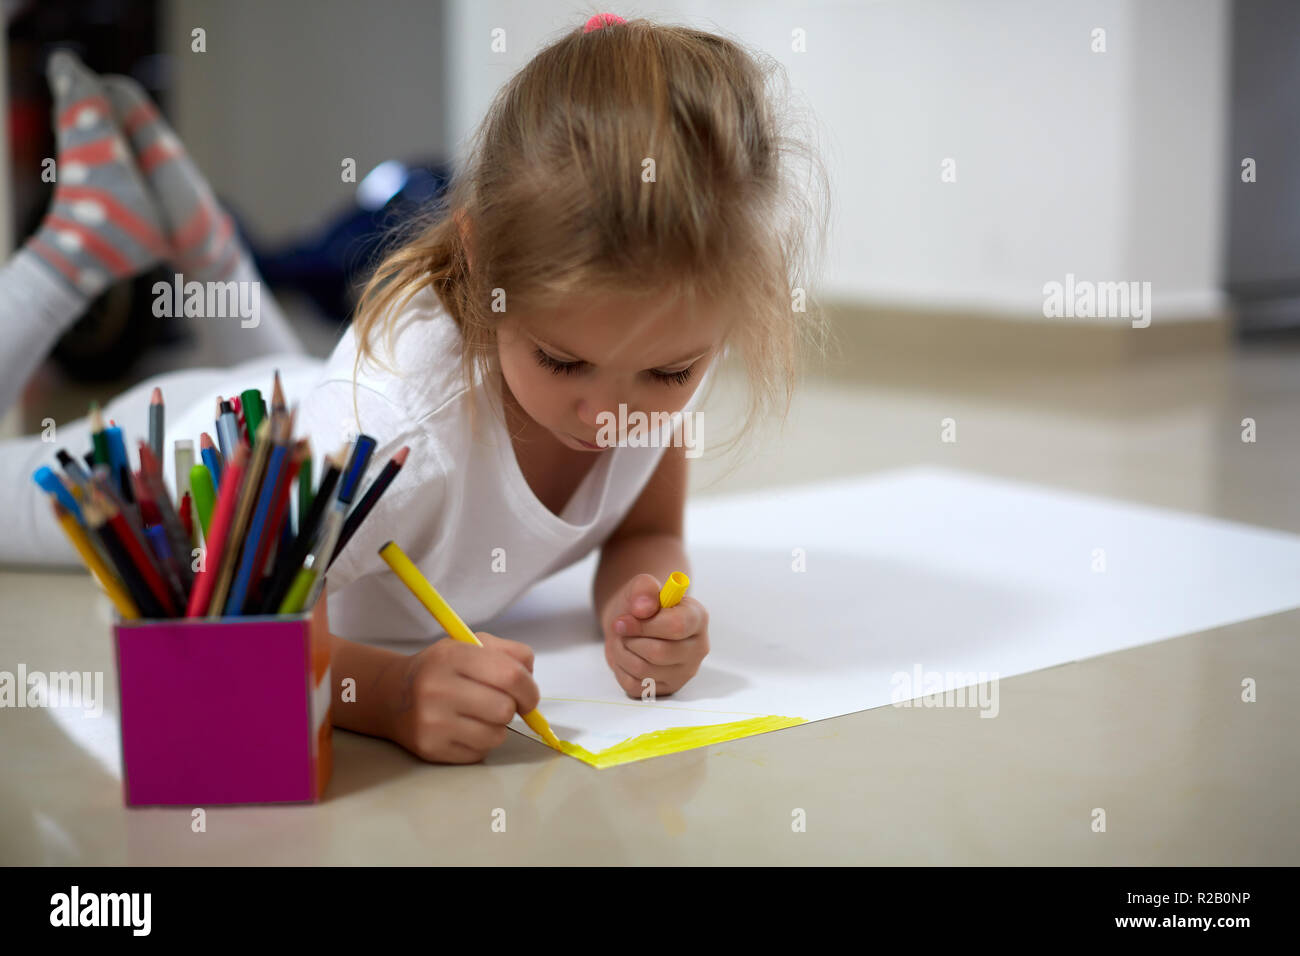 Adorable little girl lying on floor and drawing on huge paper sheet with yellow marker pen Stock Photo